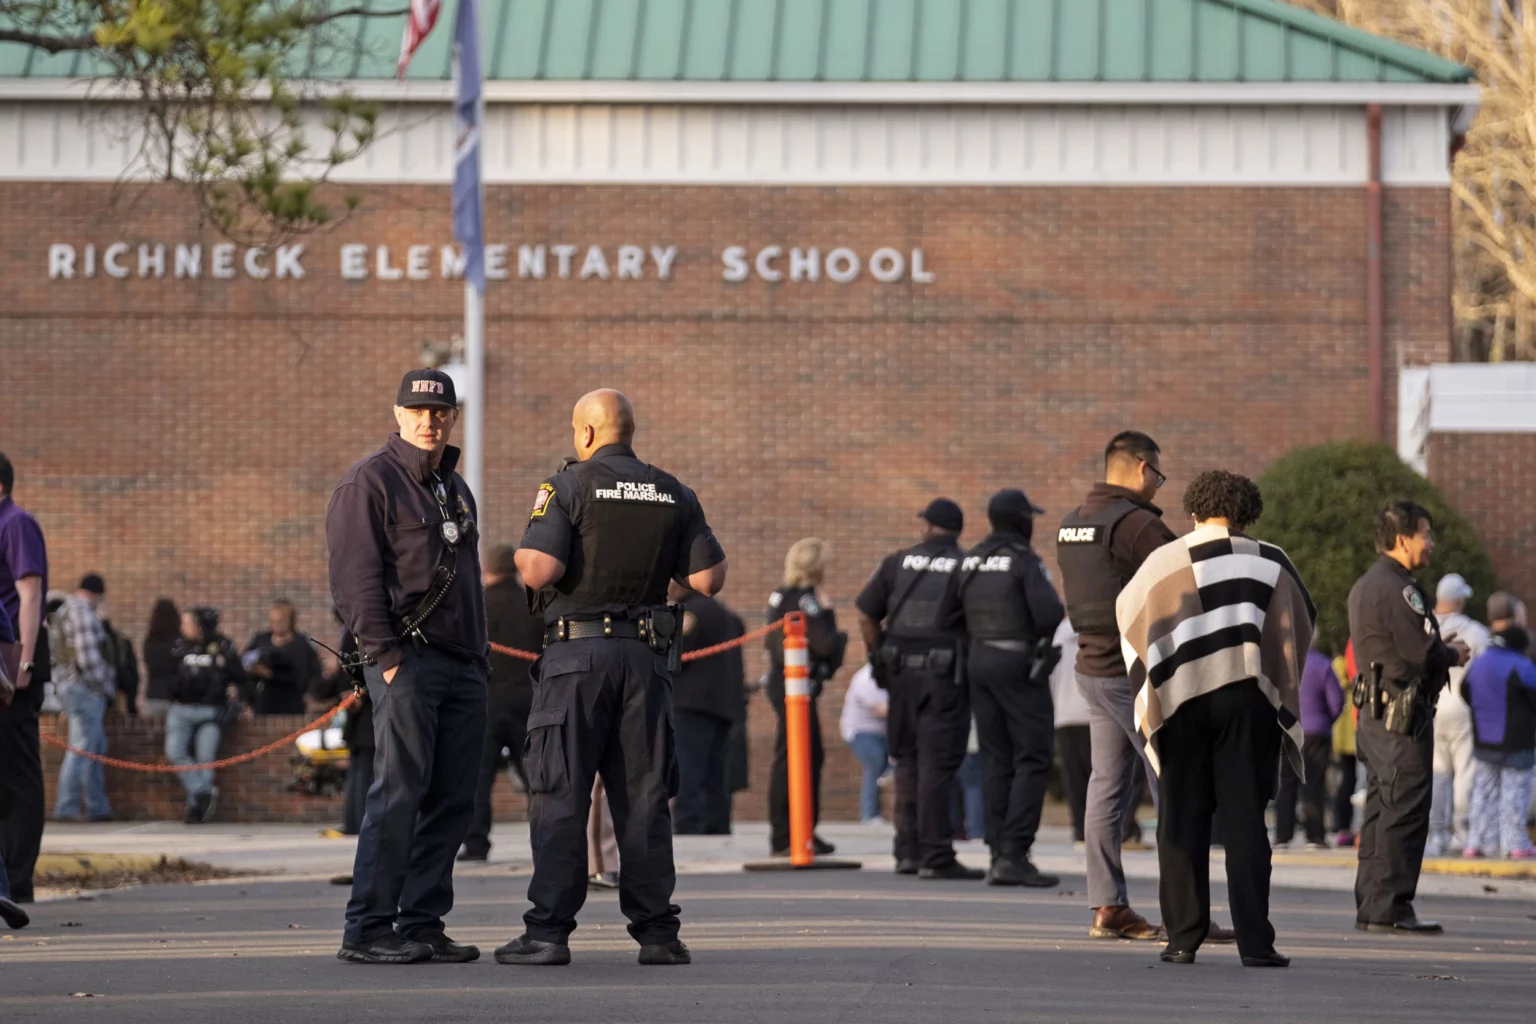 us-mother-charged-after-her-6-year-old-student-shoots-school-teacher